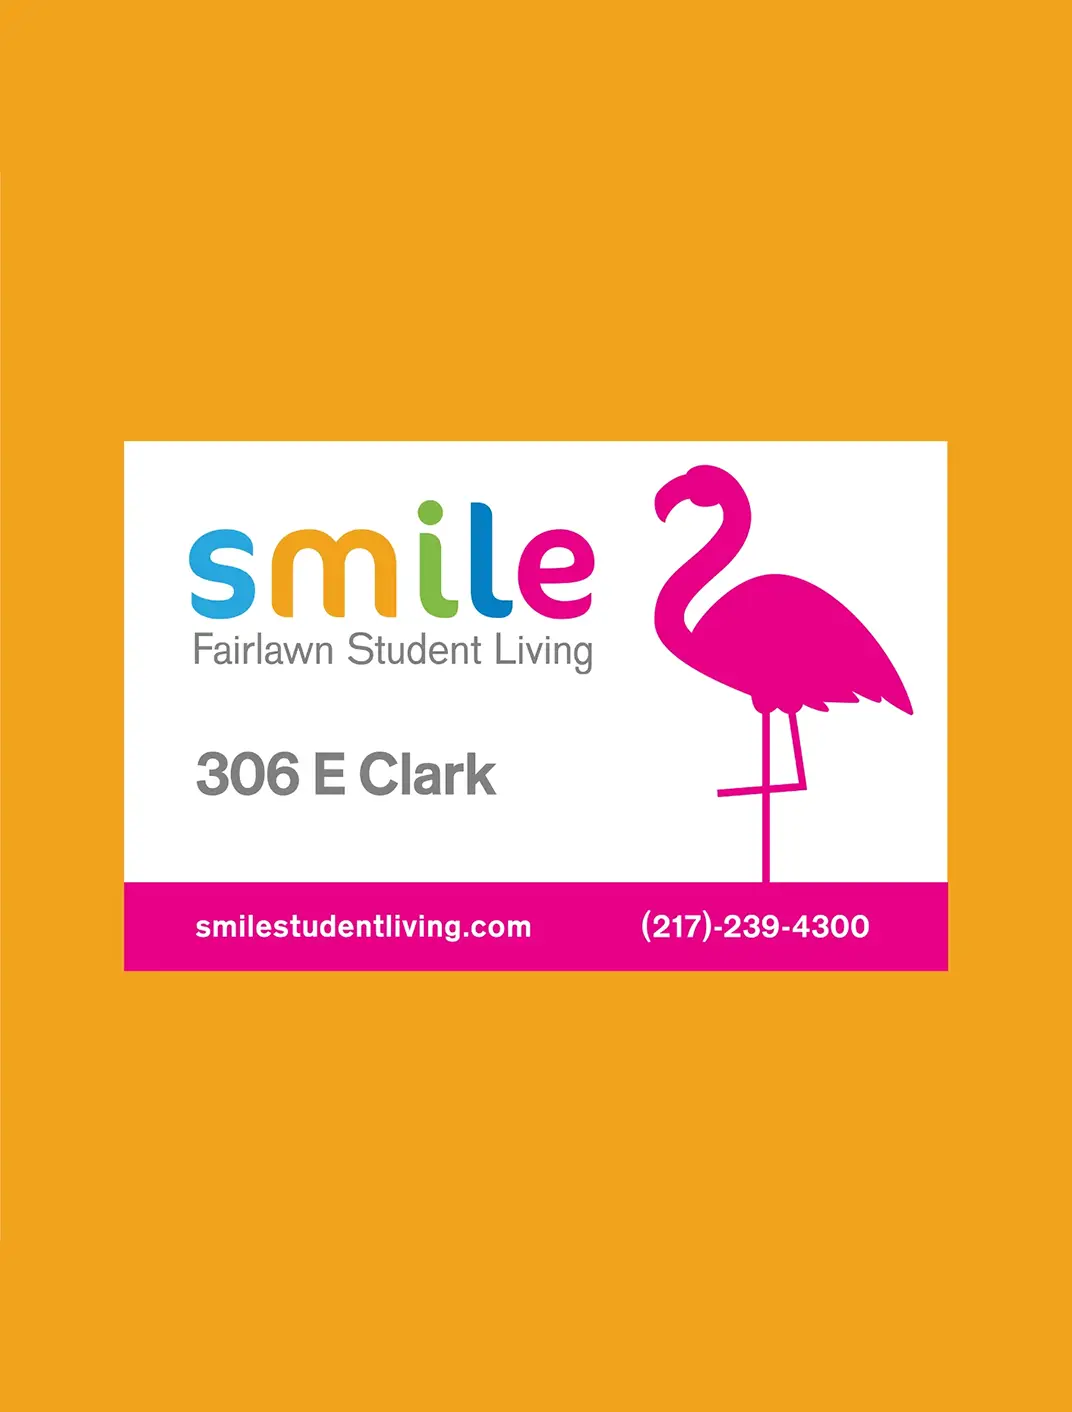 A business card with a flamingo and the word smile.